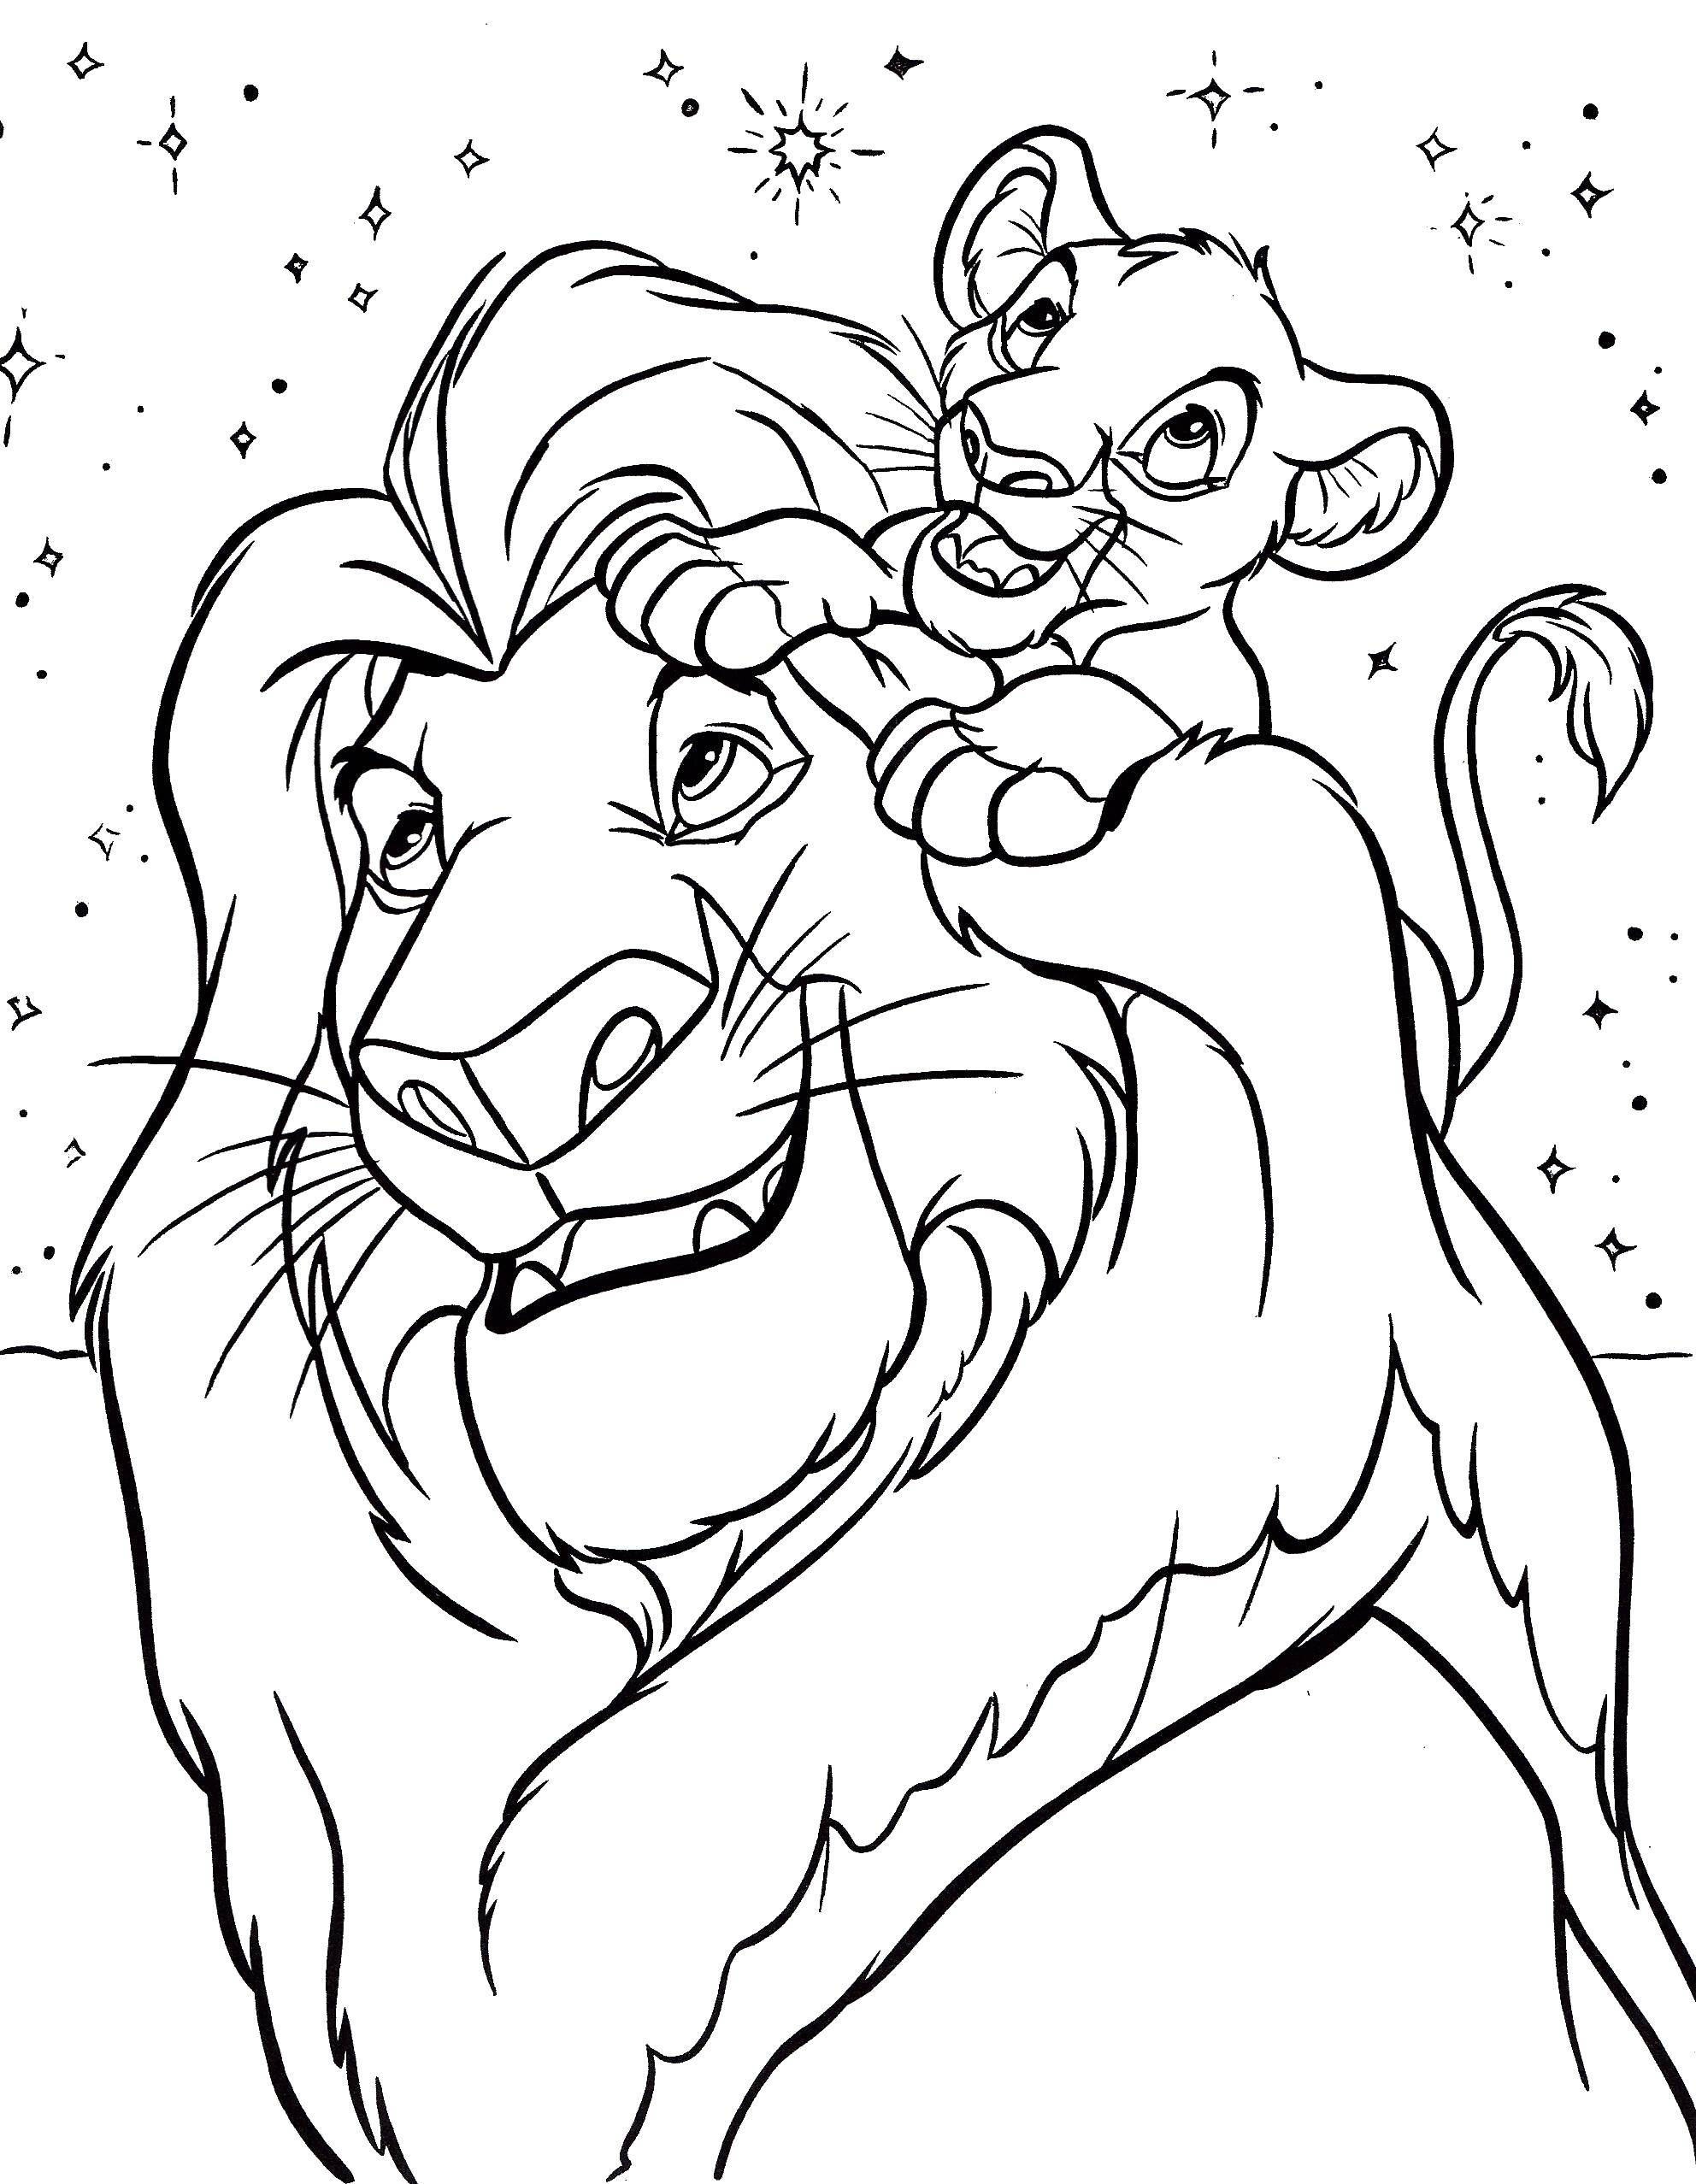 Coloring Baby daddy. Category Disney coloring pages. Tags:  Disney, Lion King.